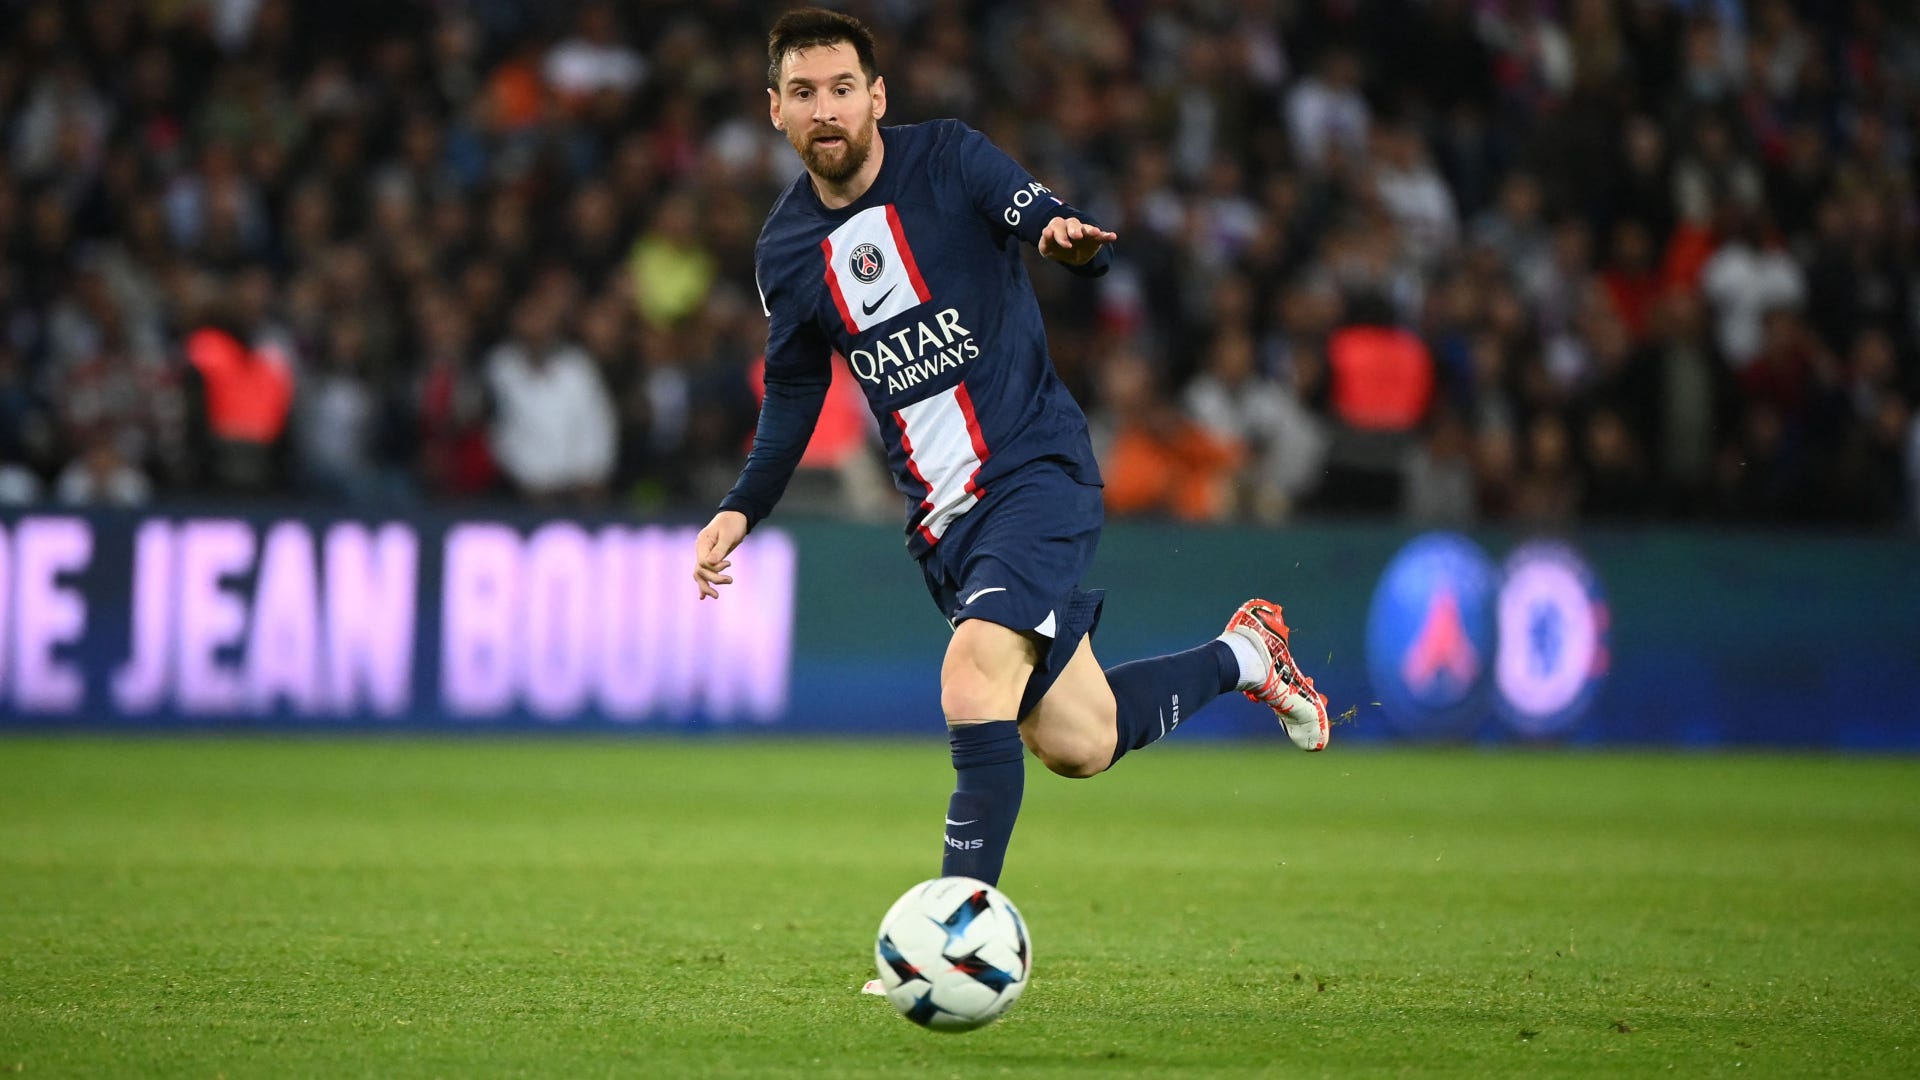 Lorient vs PSG Live stream, TV channel, kick-off time and where to watch Goal